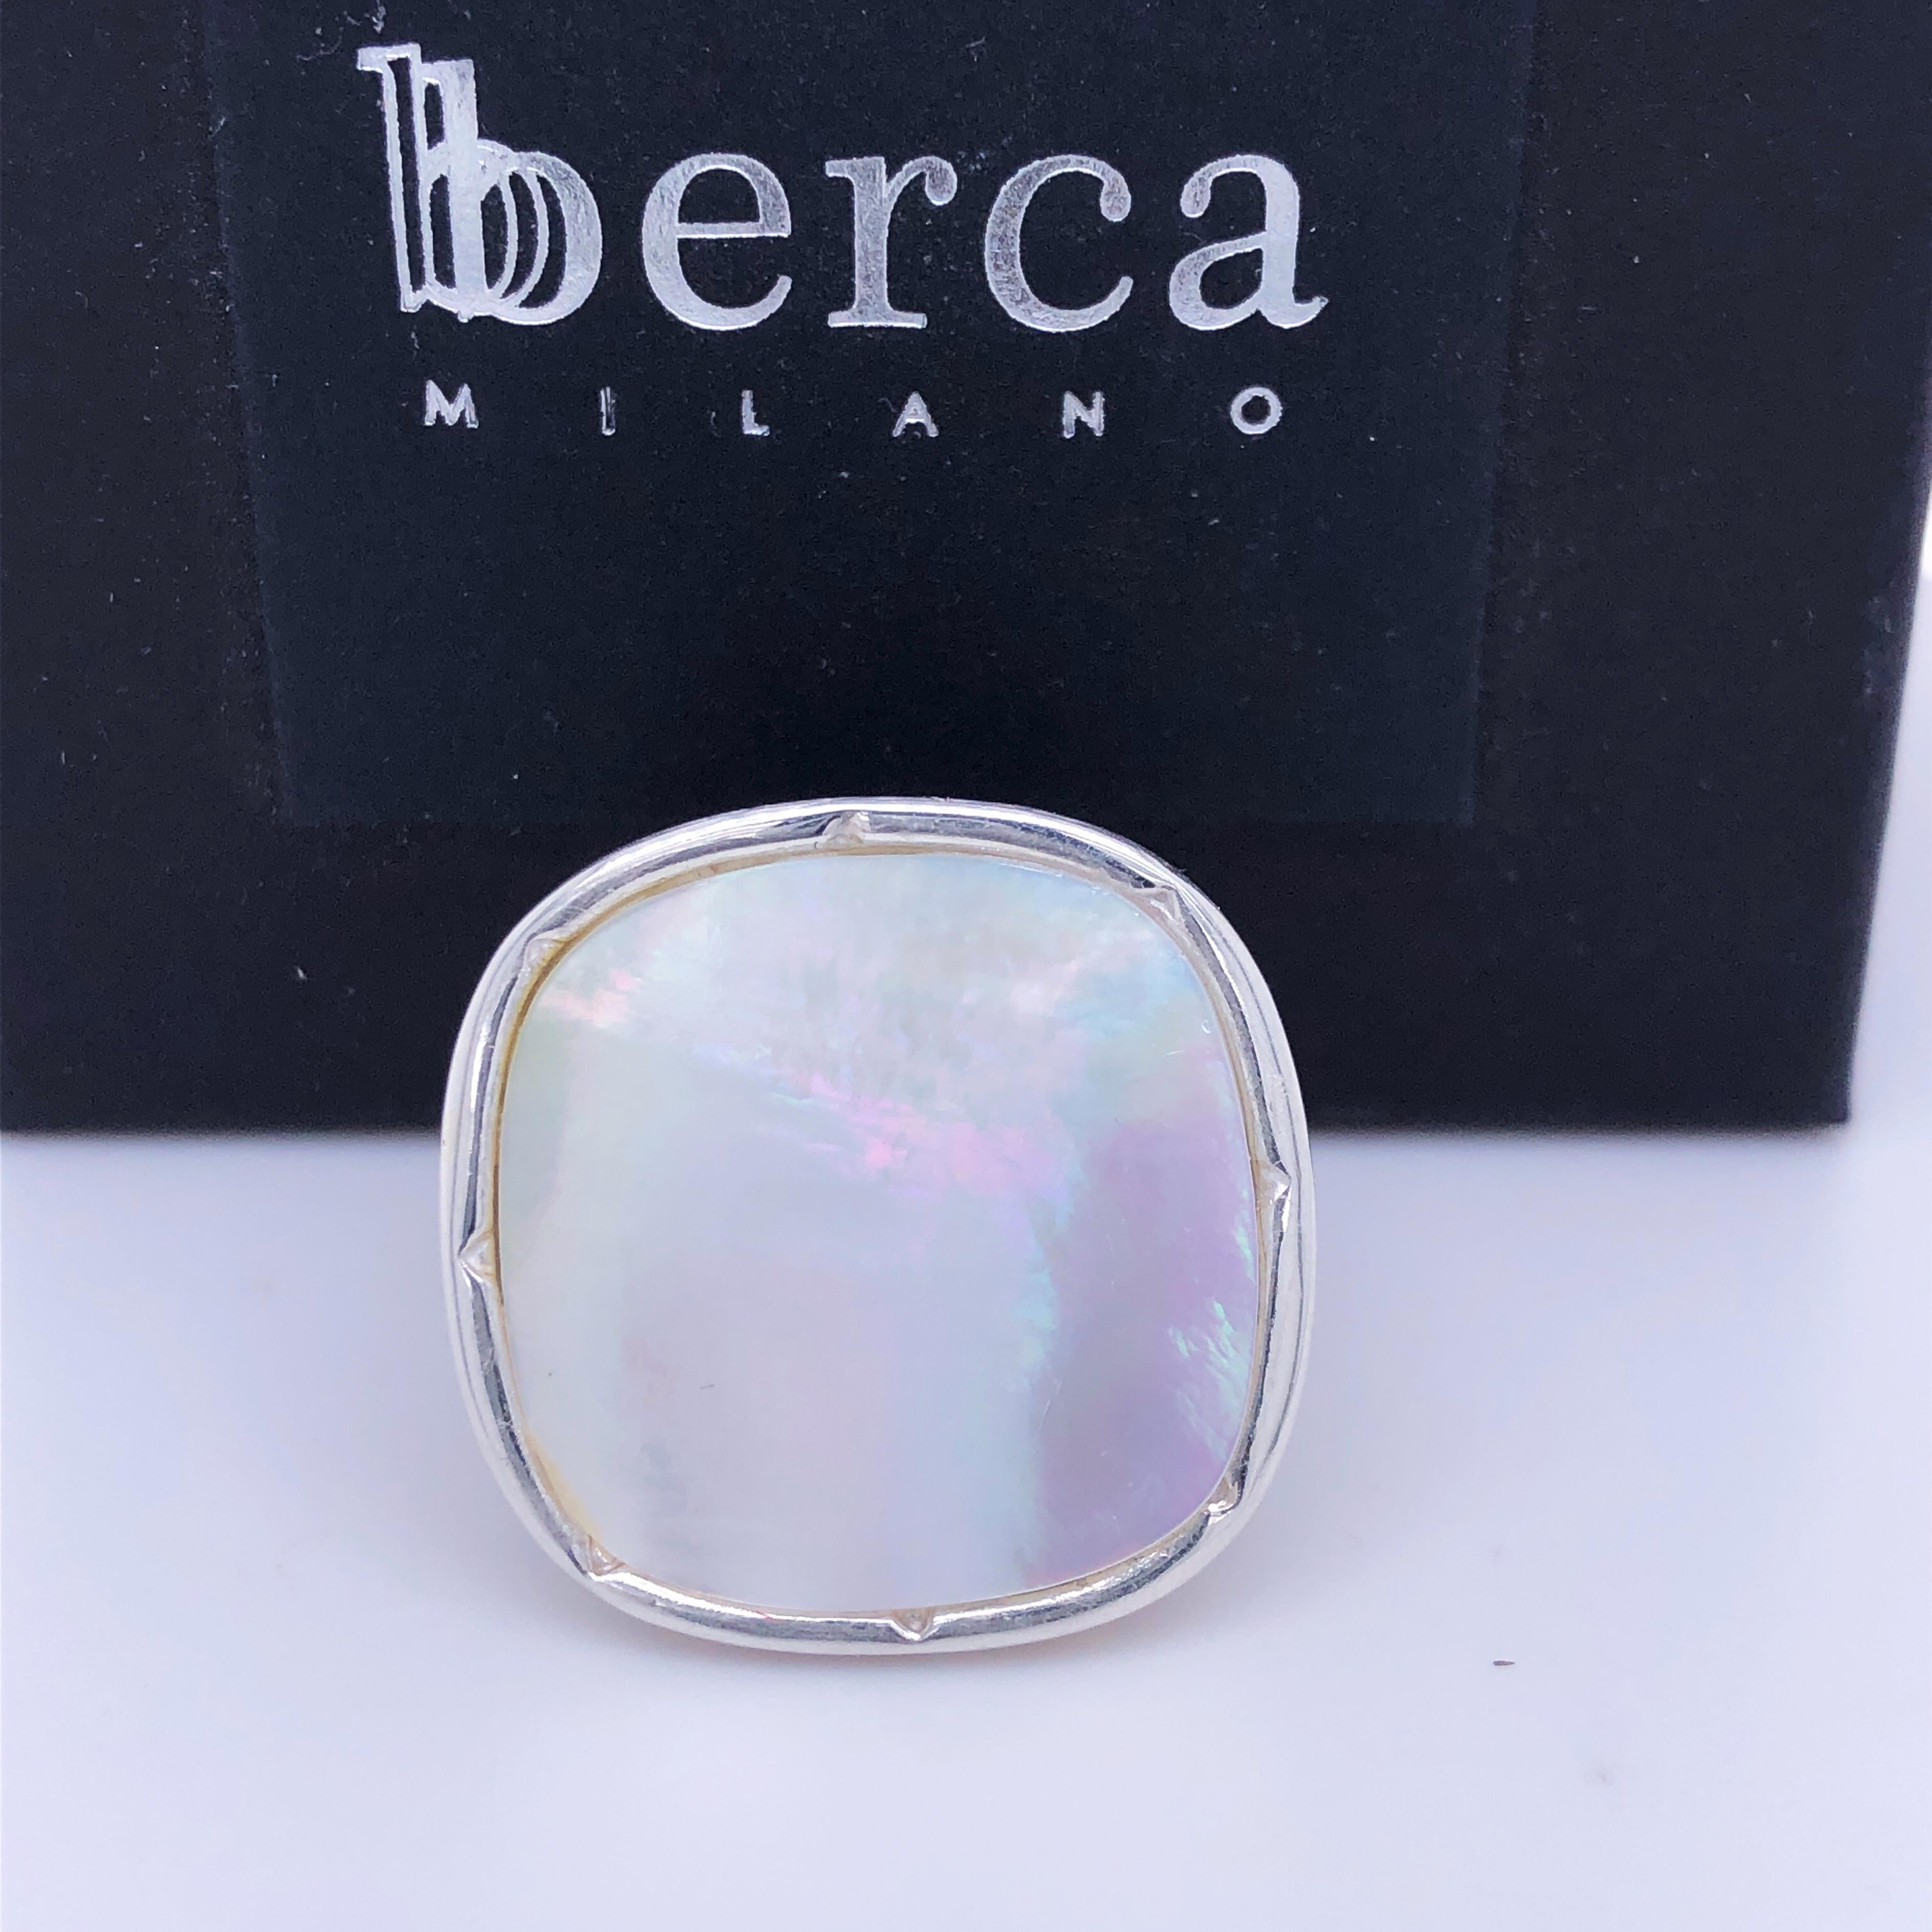 One-of-a-kind, Contemporary, Chic yet Timeless Cocktail Ring Featuring a White Iridescent Hand Enameled (0.850x0.850in) Square shaped Leaf in a beautifully Handcrafted Hand Engraved Solid Sterling Silver Setting.
The color-changing of Enamel